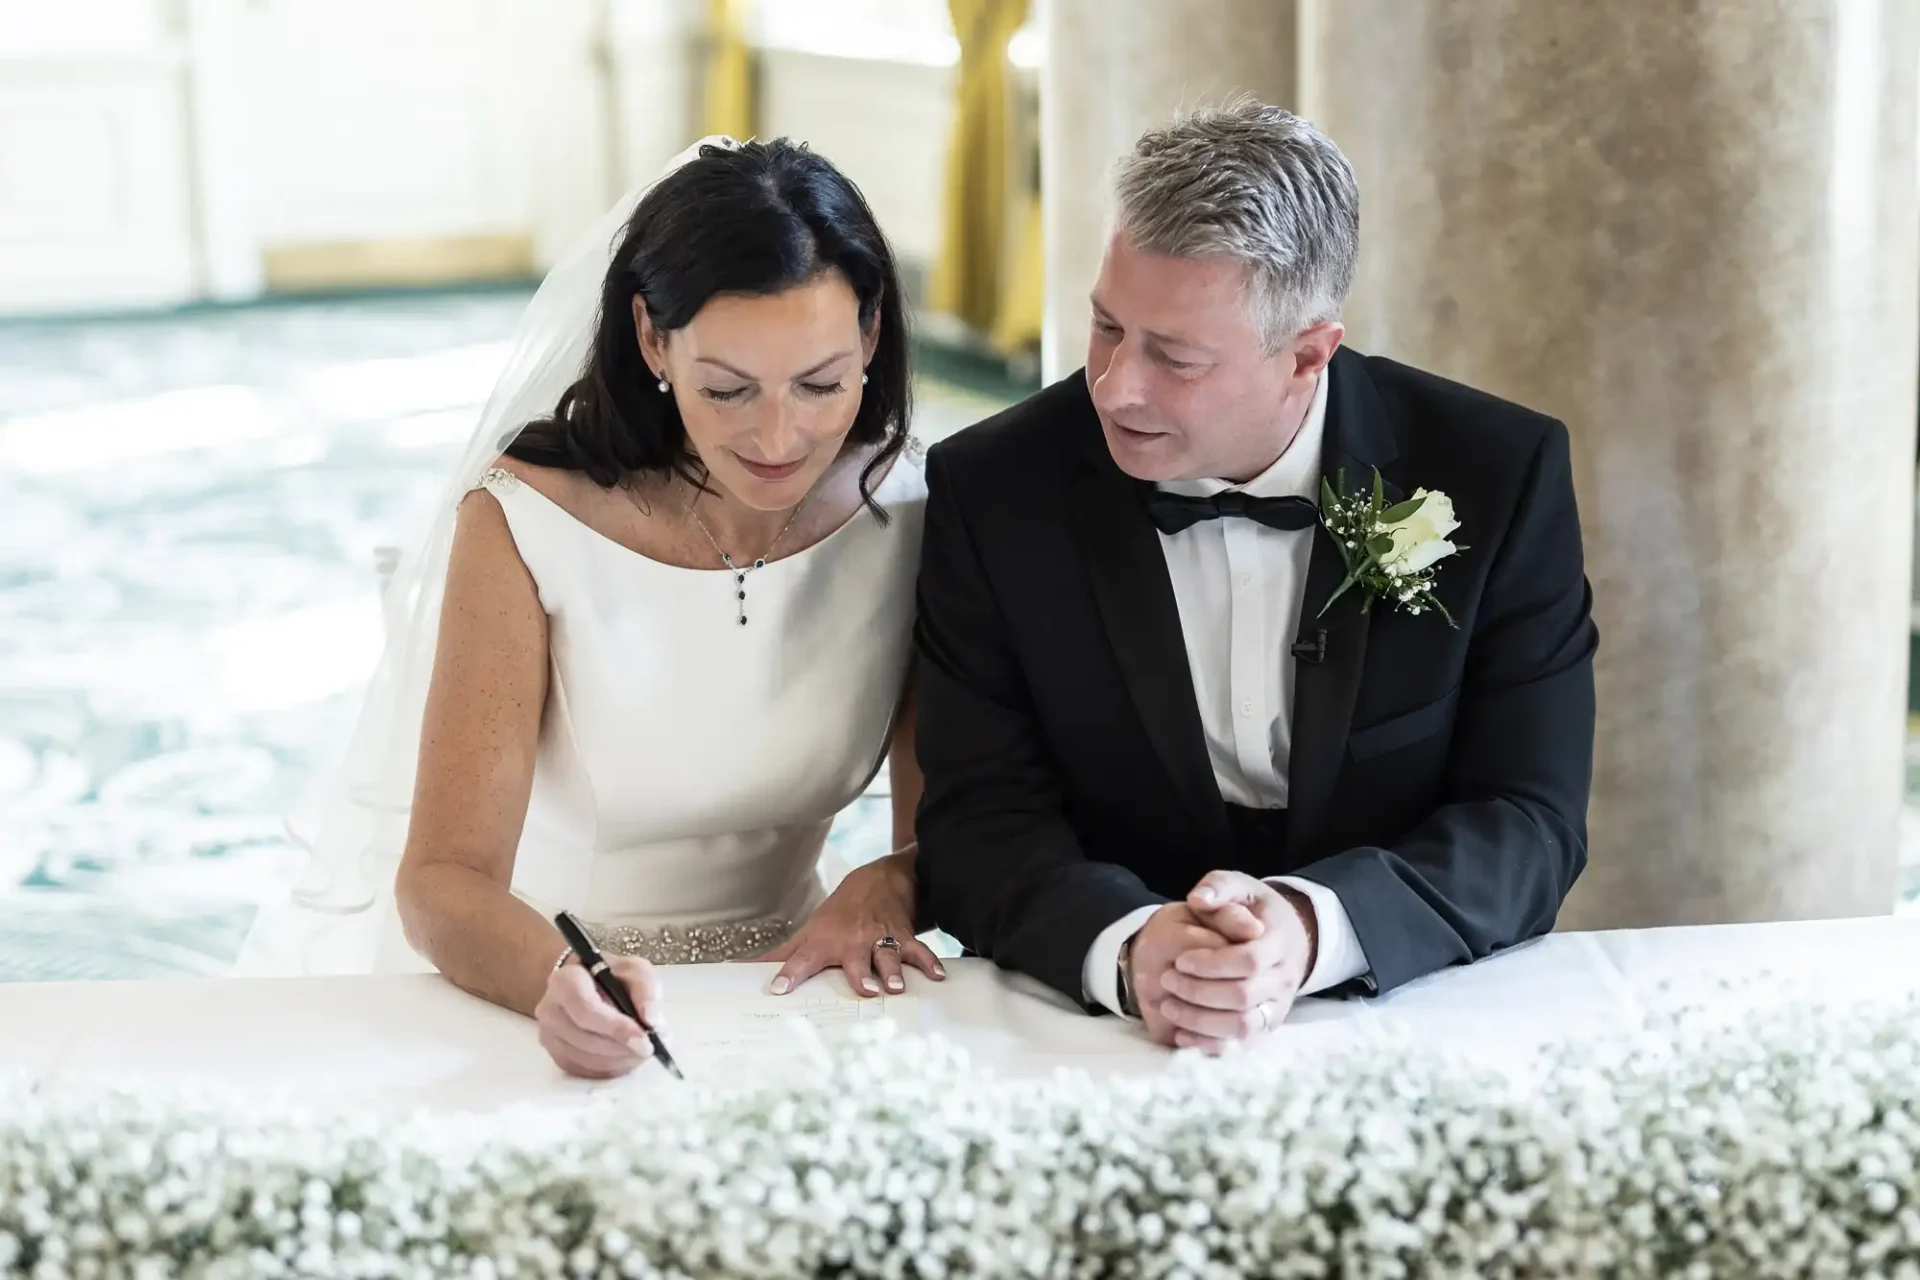 A bride in a white dress and a groom in a black tuxedo sign a document together at a table adorned with white flowers.